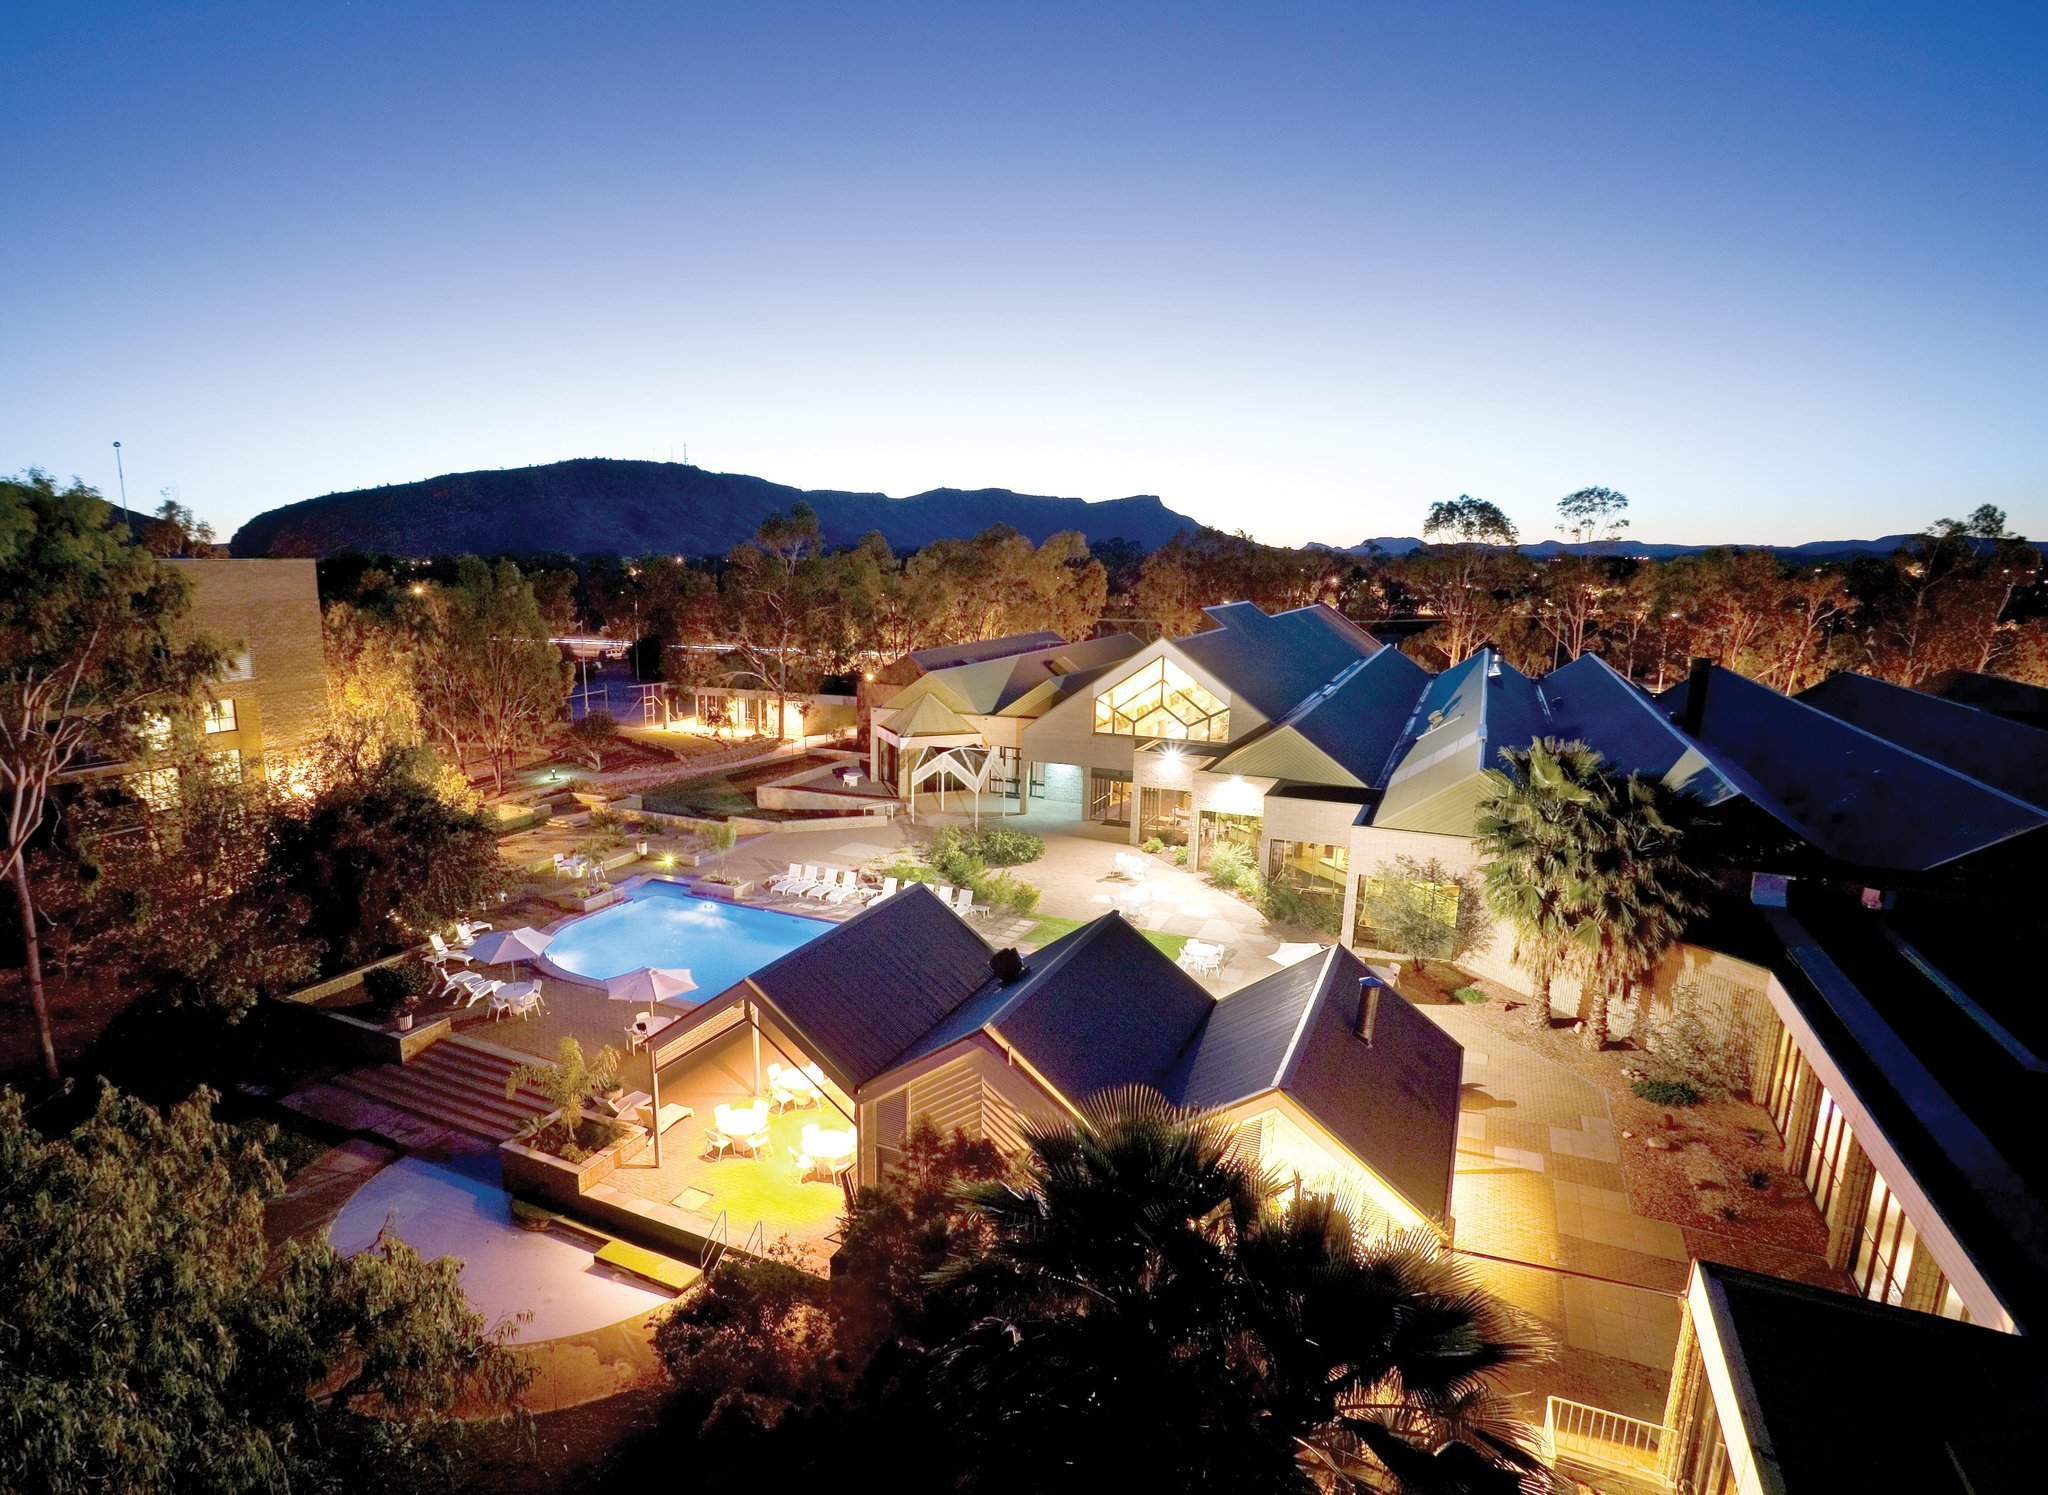 Photo of DoubleTree by Hilton Hotel Alice Springs, Alice Springs, Northern Territory, Australia